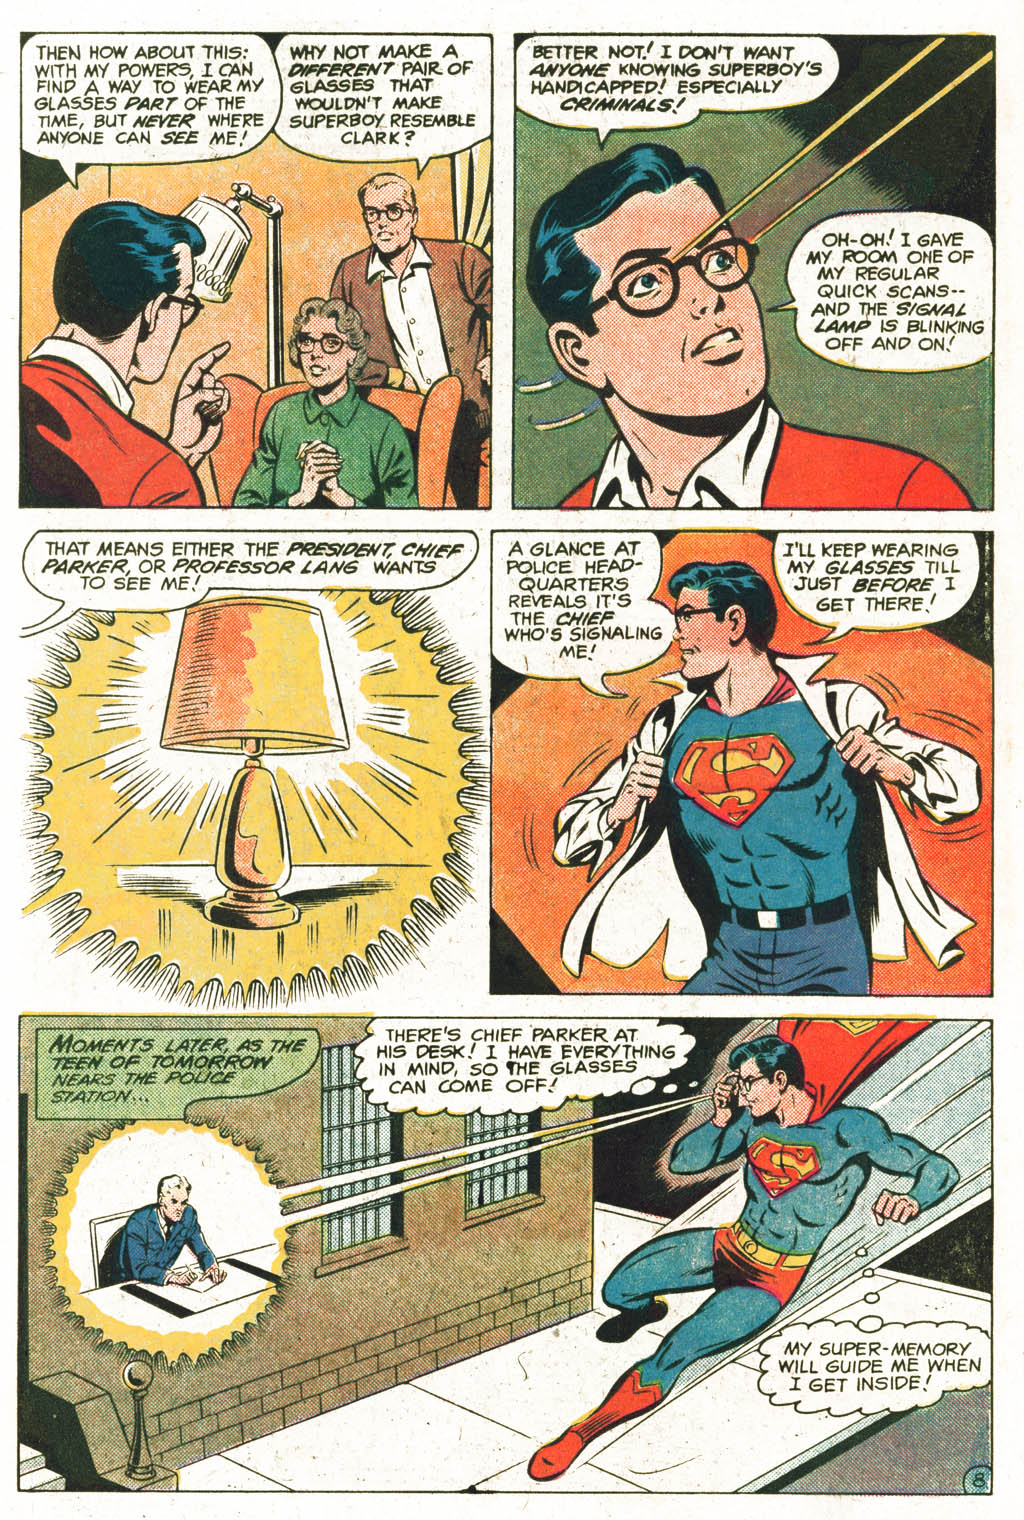 The New Adventures of Superboy 24 Page 8